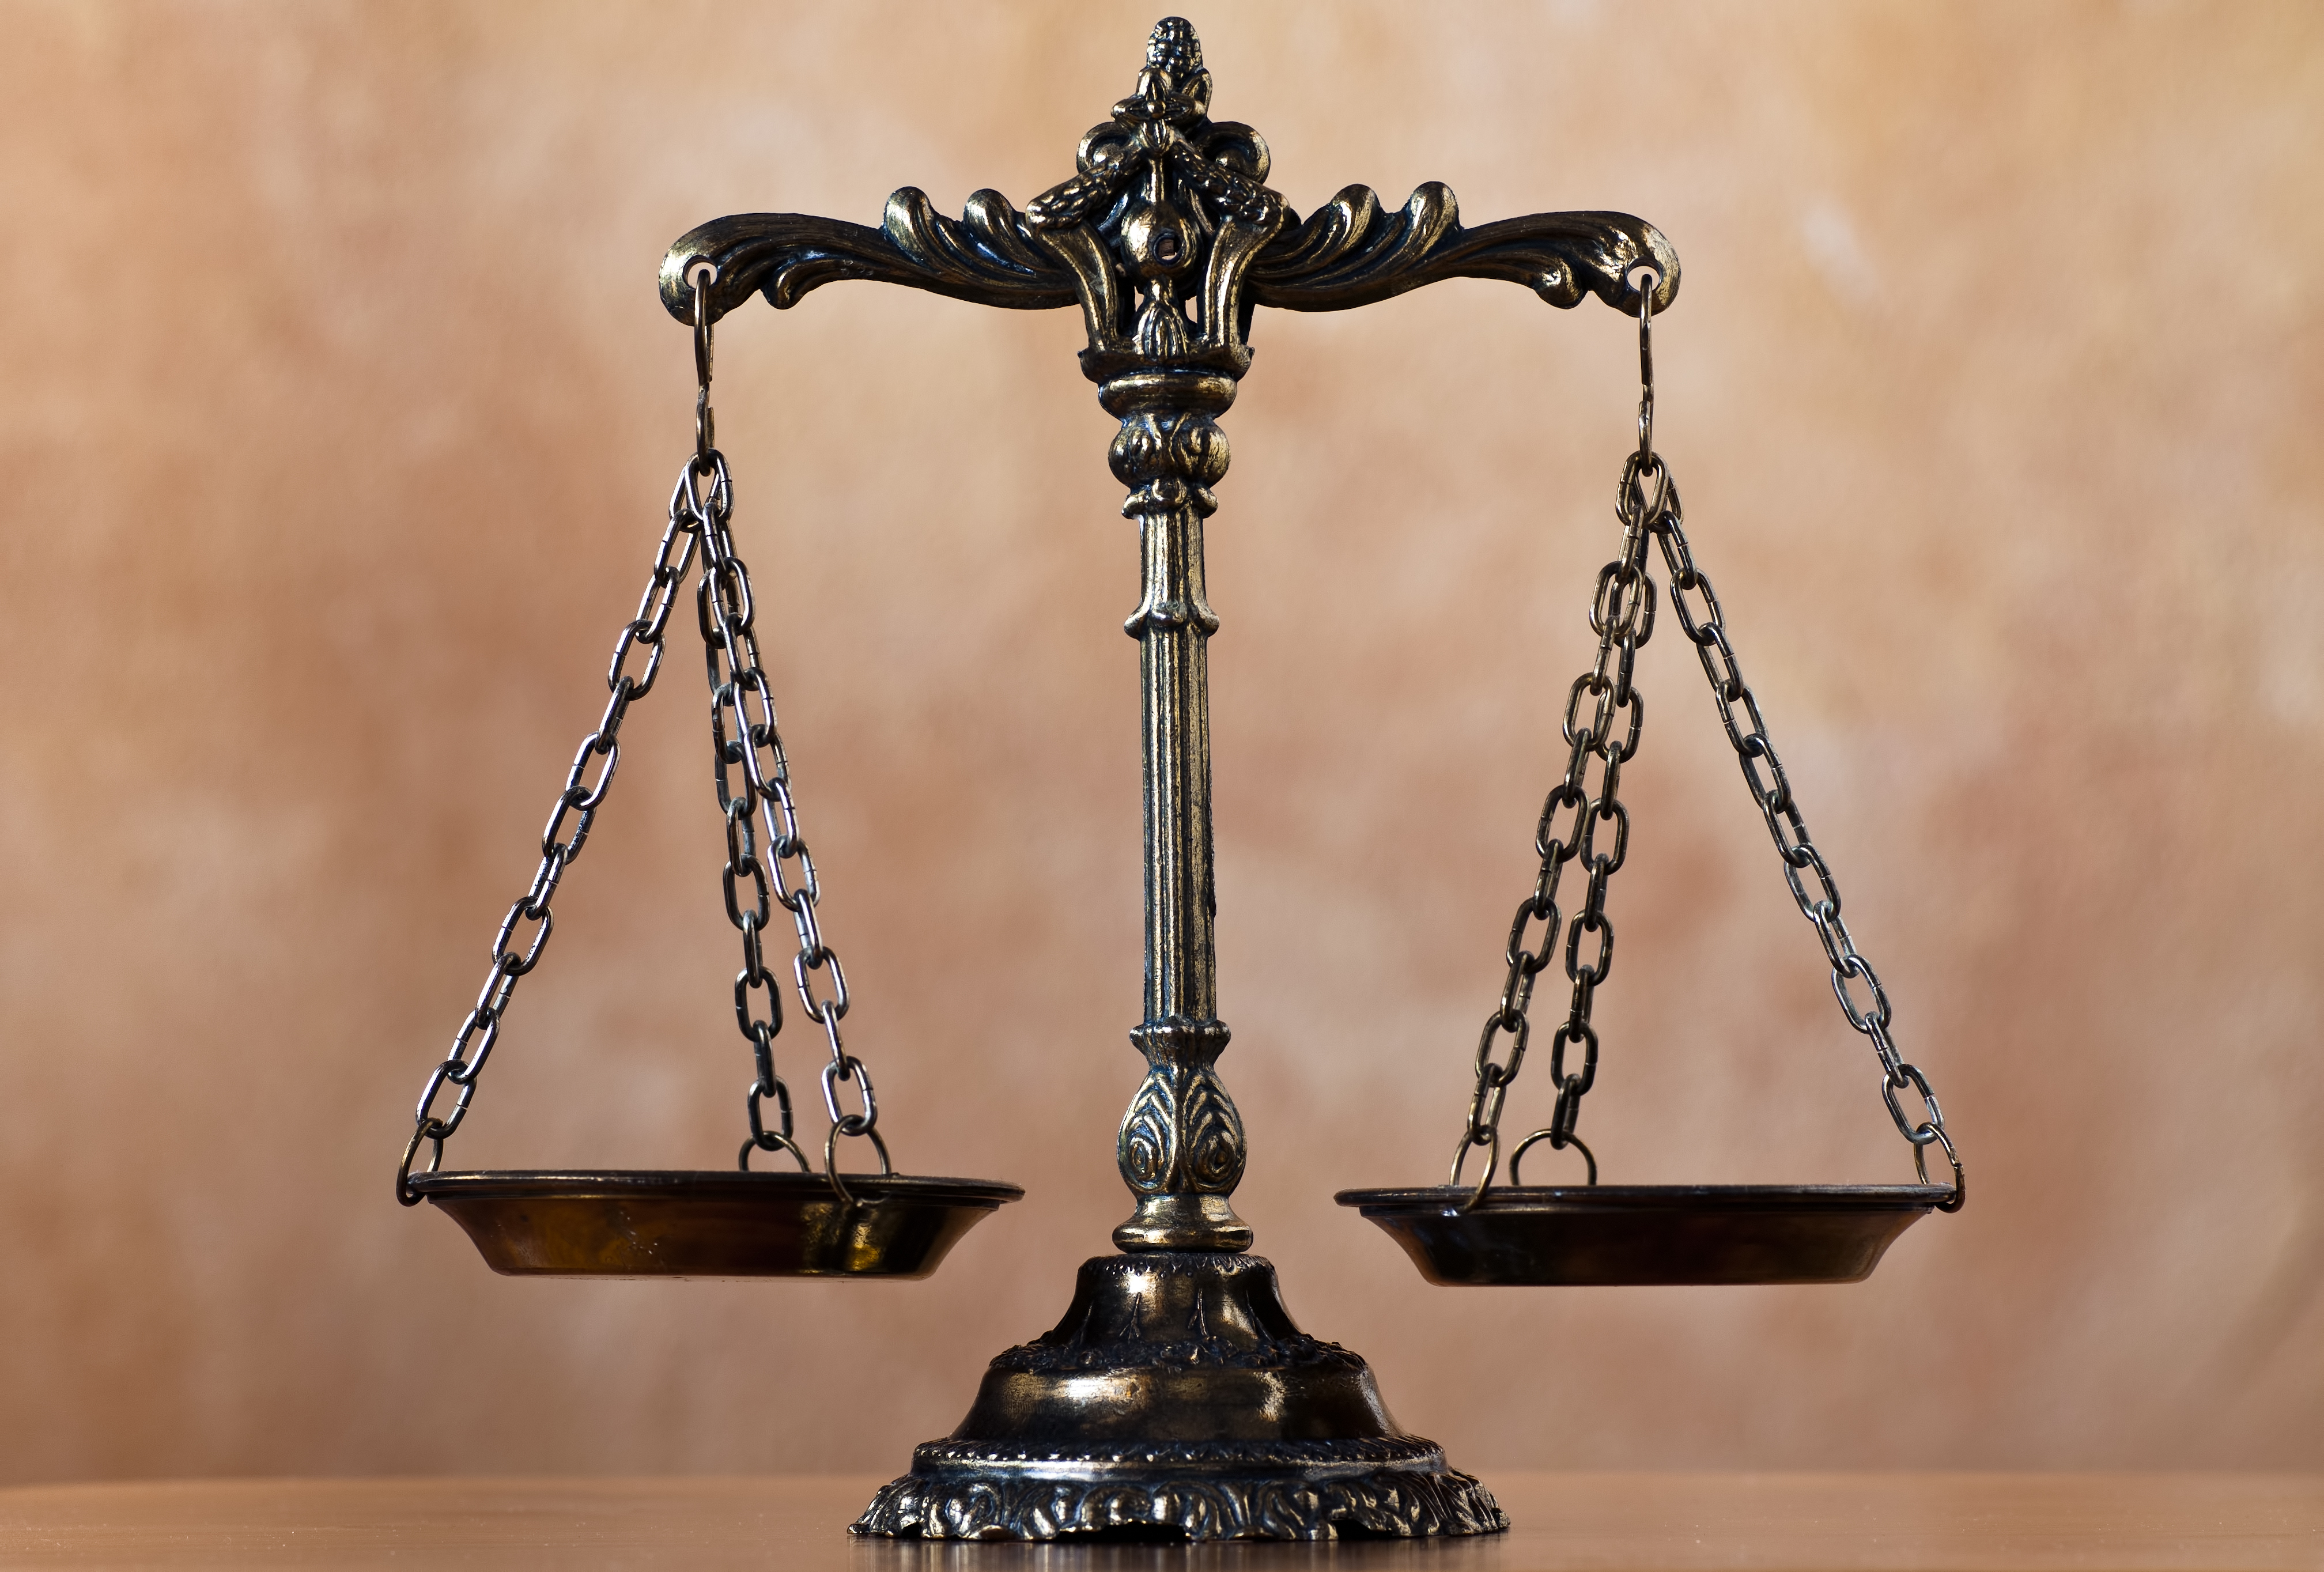 Scales of justice. Shutterstock/MilousSK